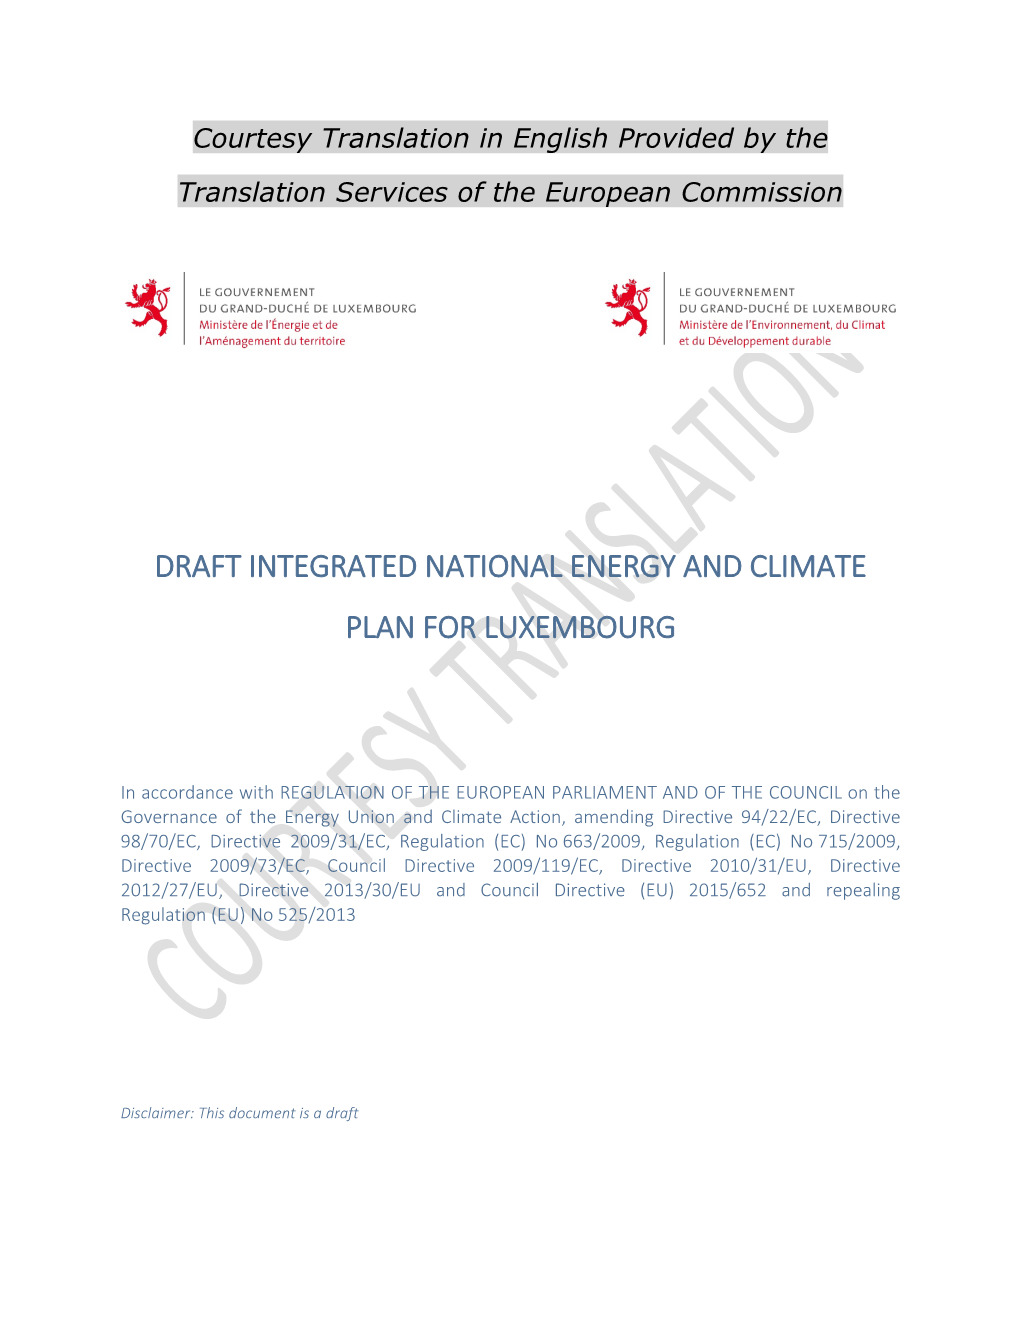 Draft Integrated National Energy and Climate Plan for Luxembourg